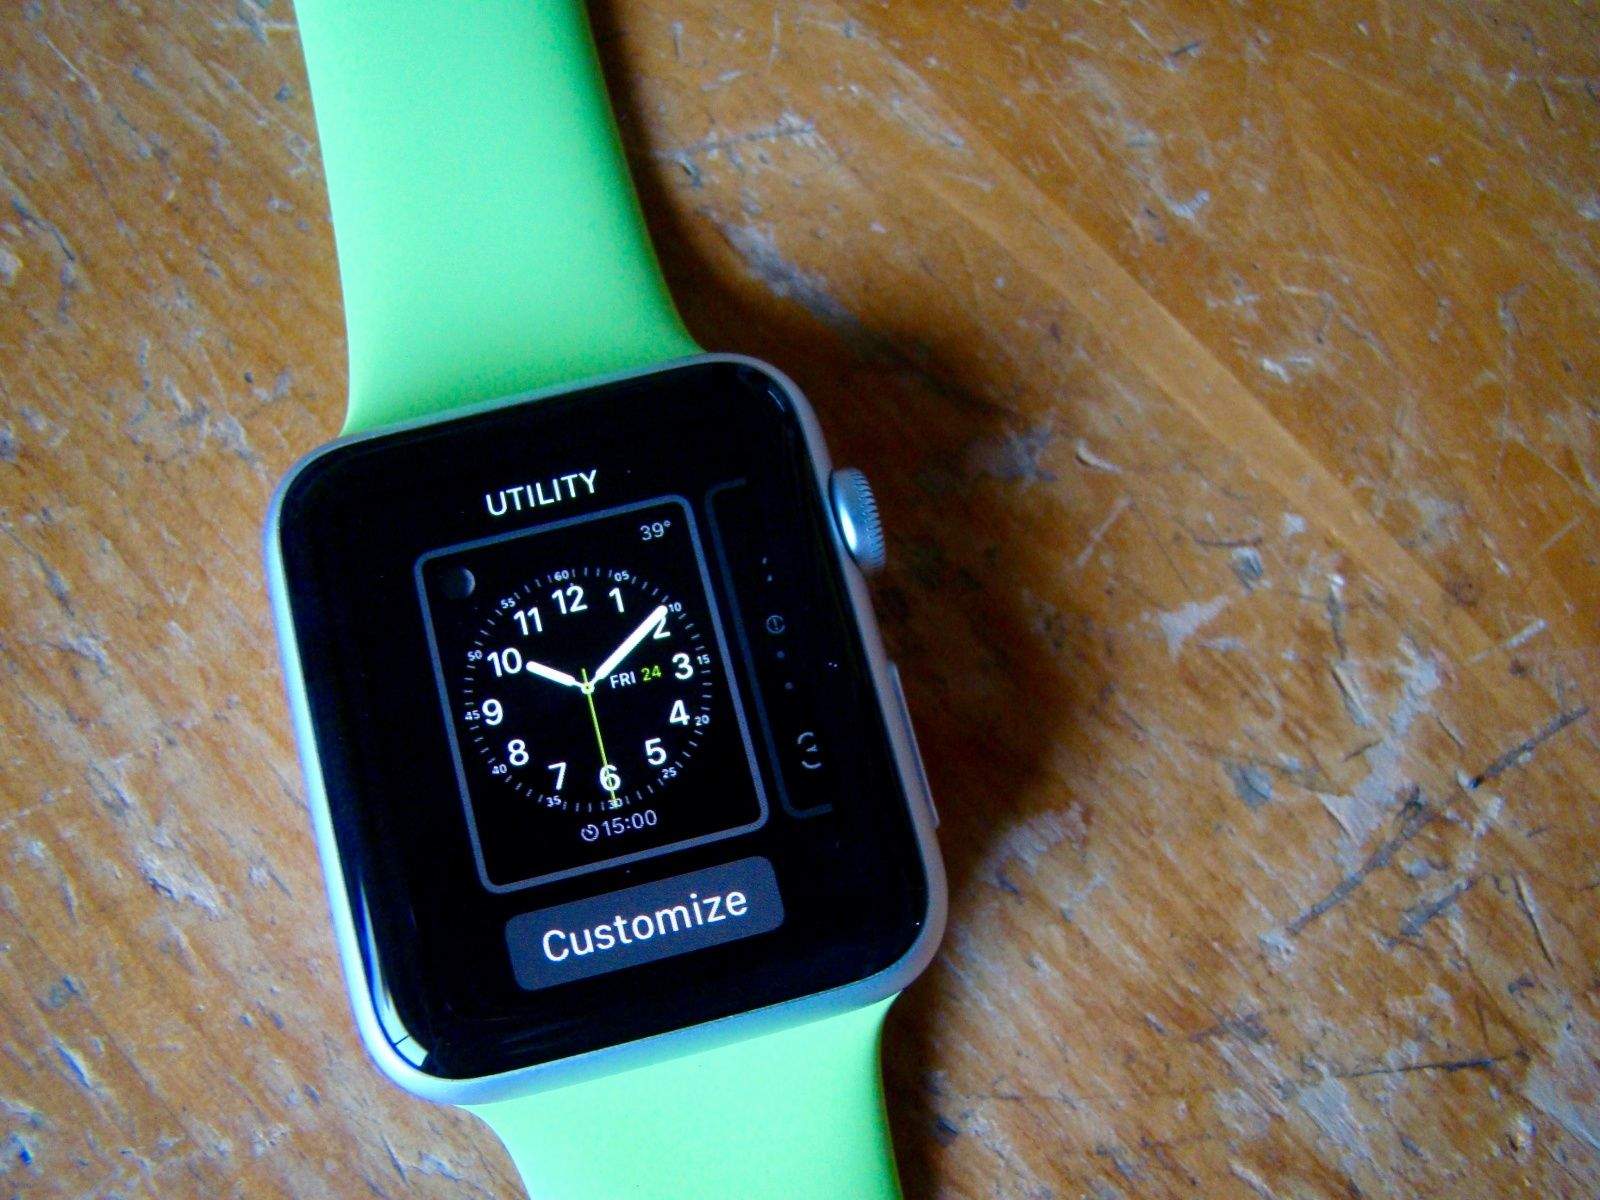 There's a lot of utility in this watch face. Photo: Rob LeFebvre/Cult of Mac